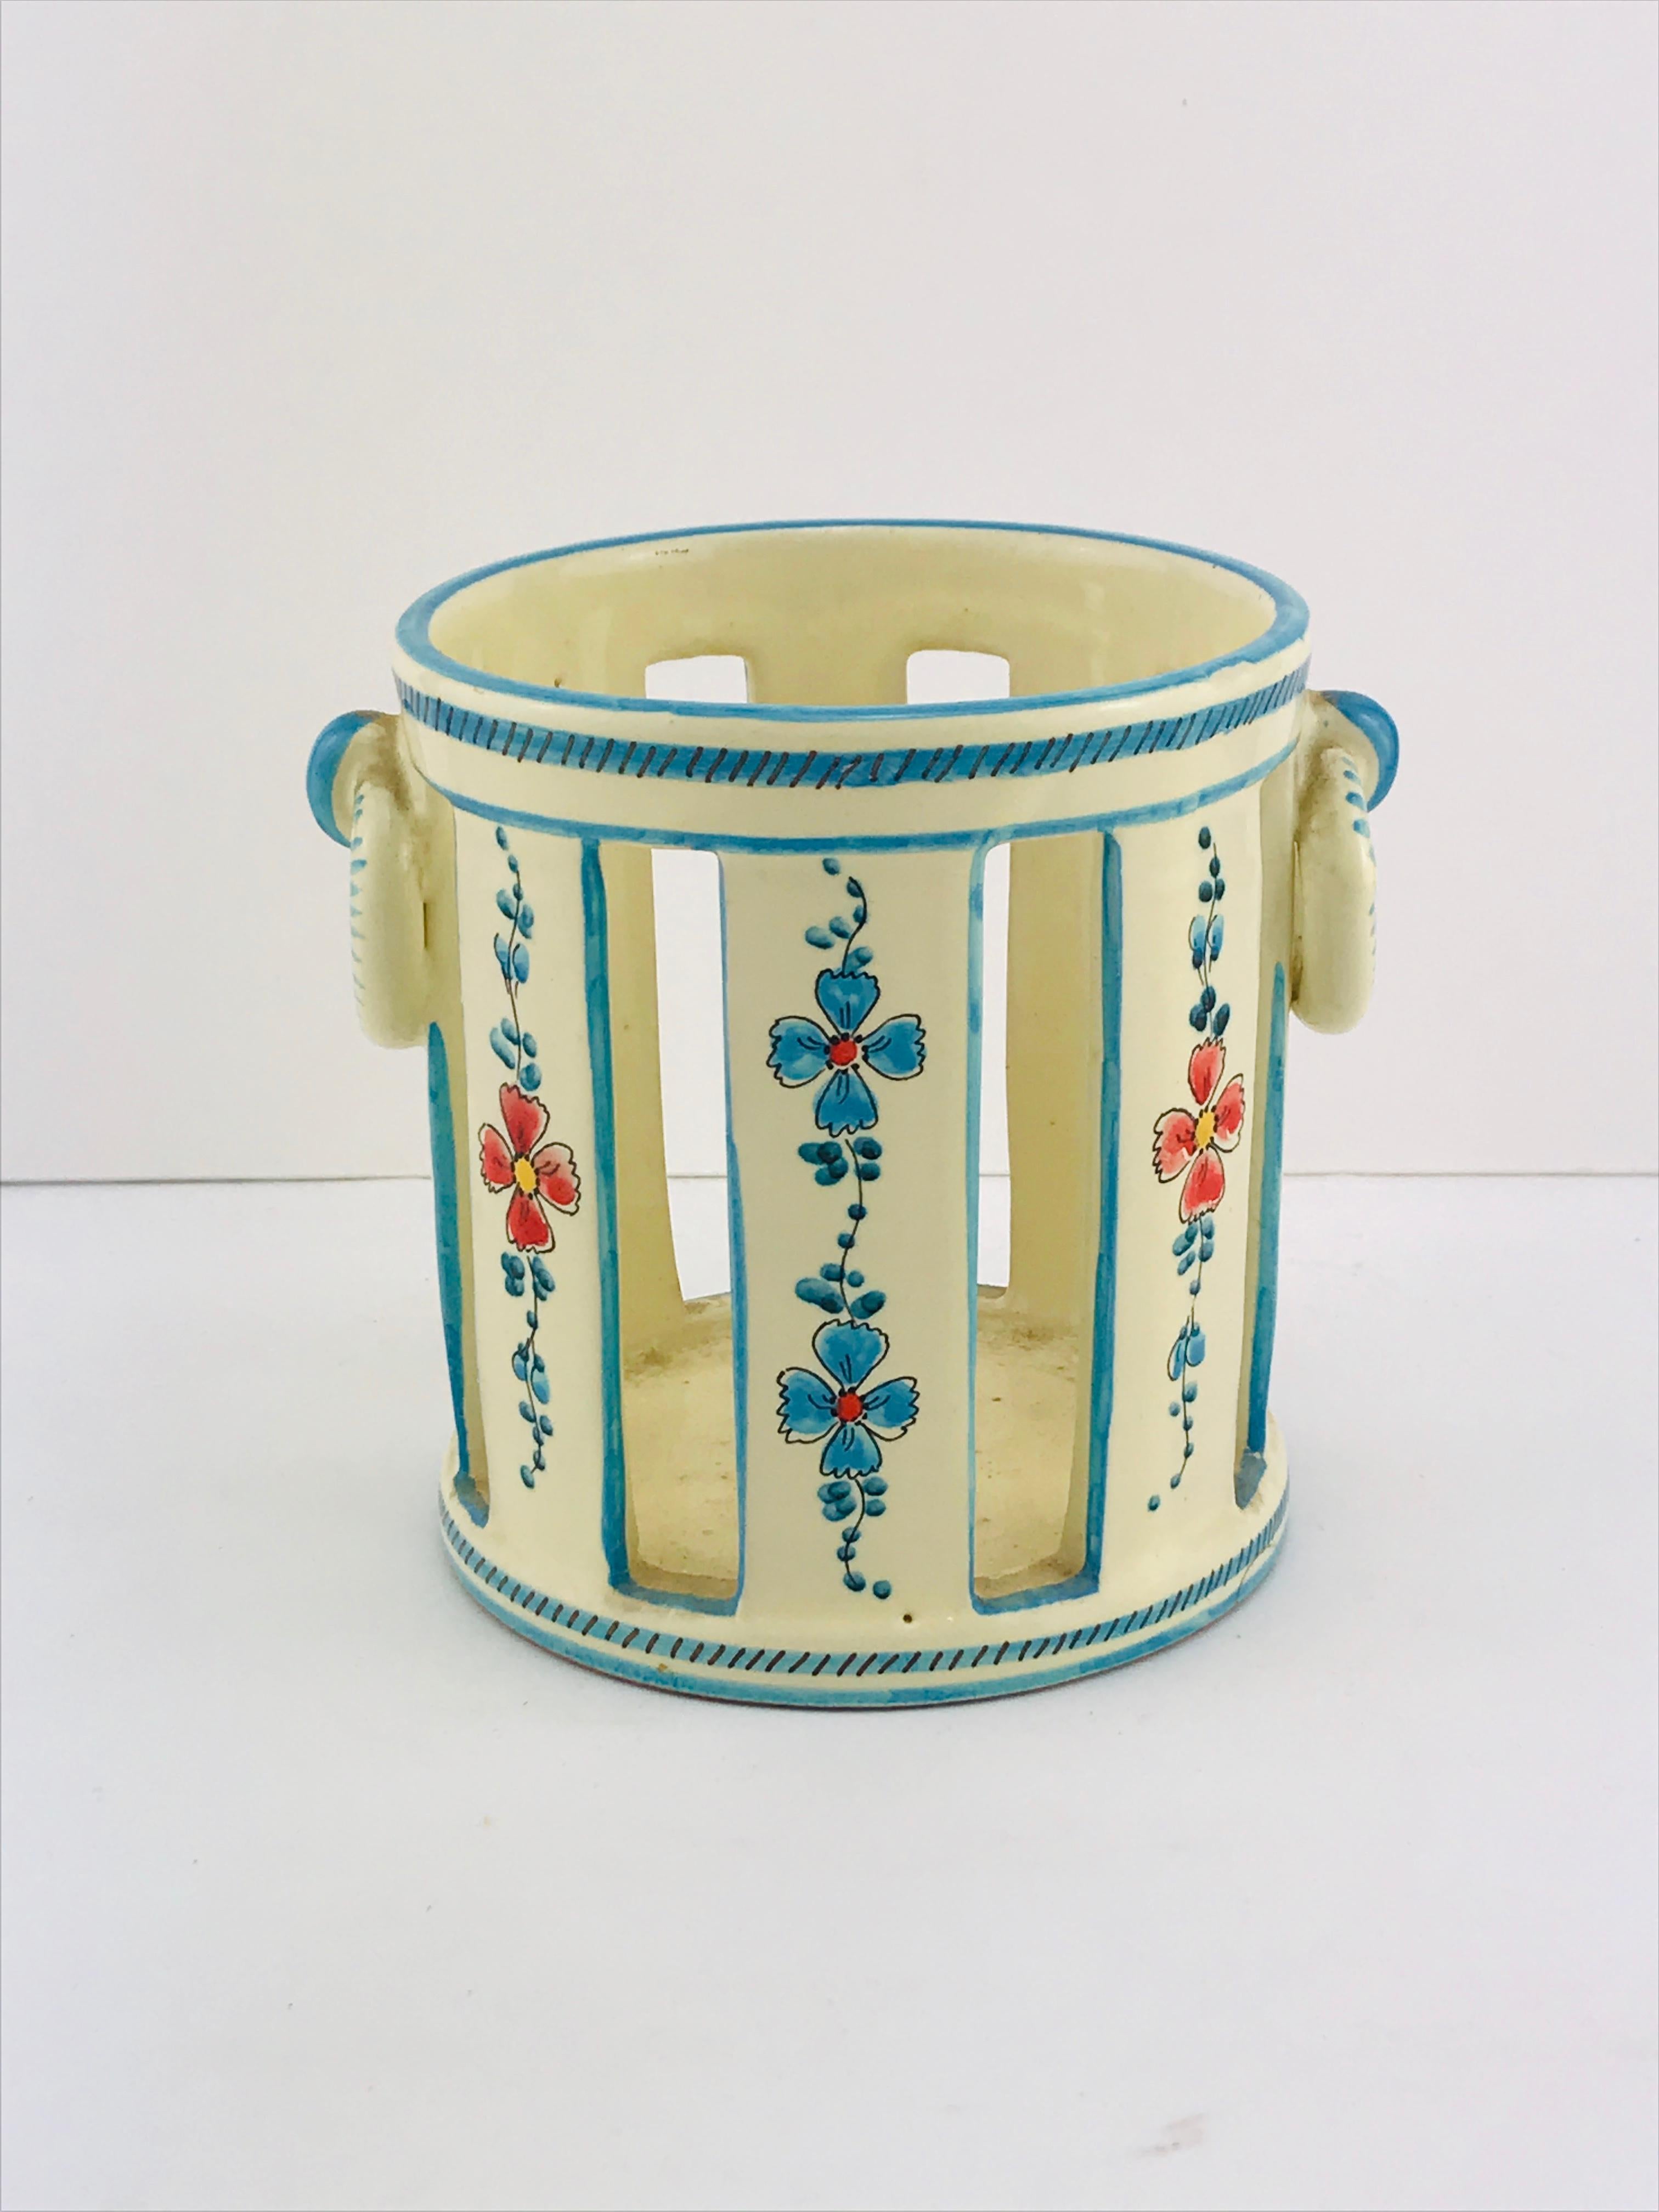 Beautiful decorative ceramic by Gualdo Deruta, 1950s.
Amazing decorations hand painted all around the vase and signed on the bottom.
Very good condition.